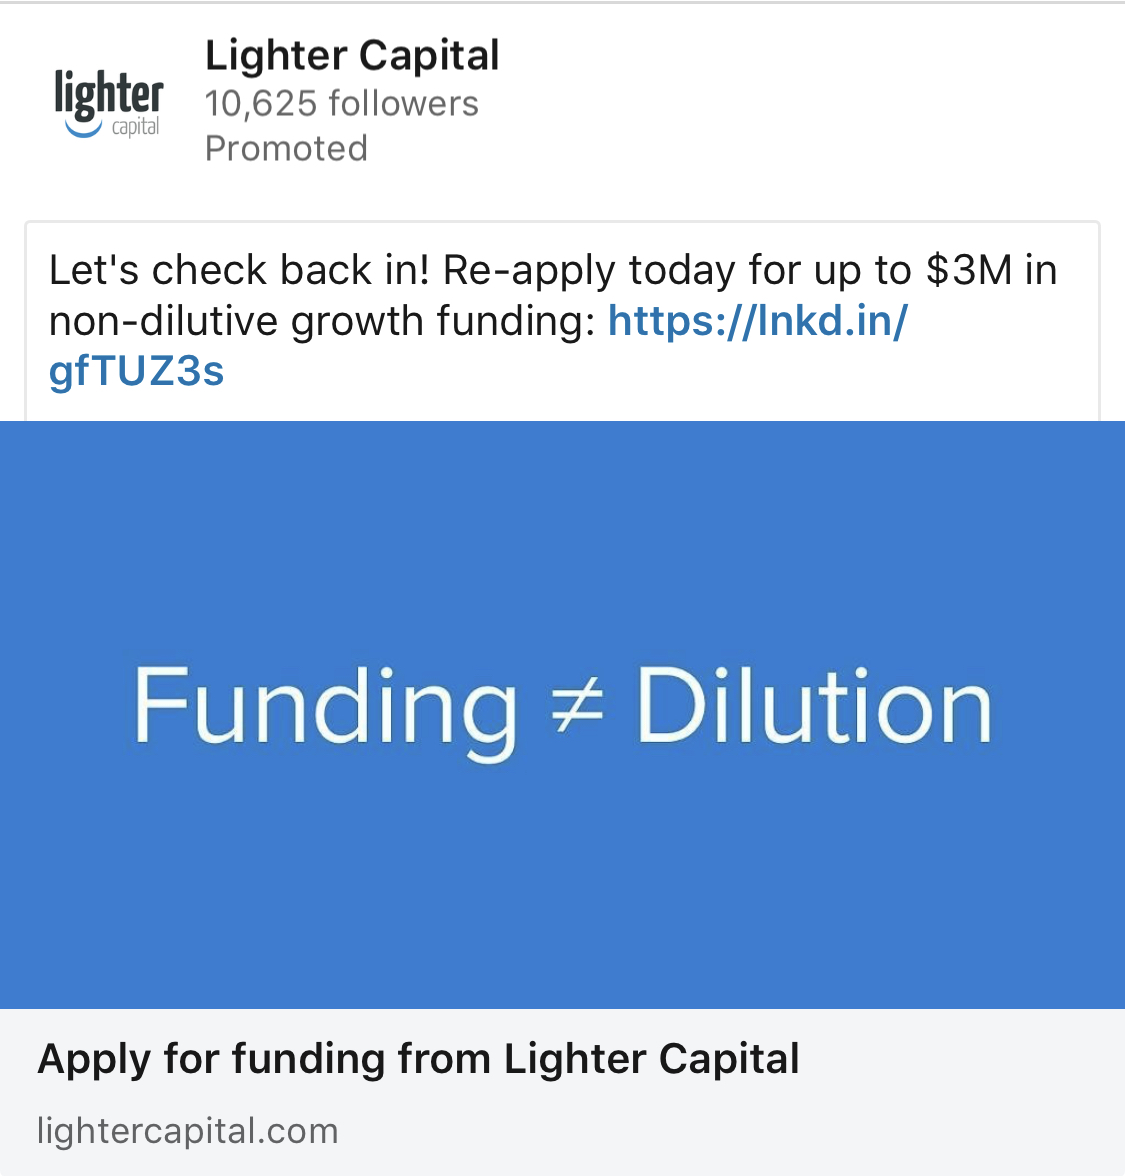 This example from Lighter Capital uses a short copywriting word count, and it's effective